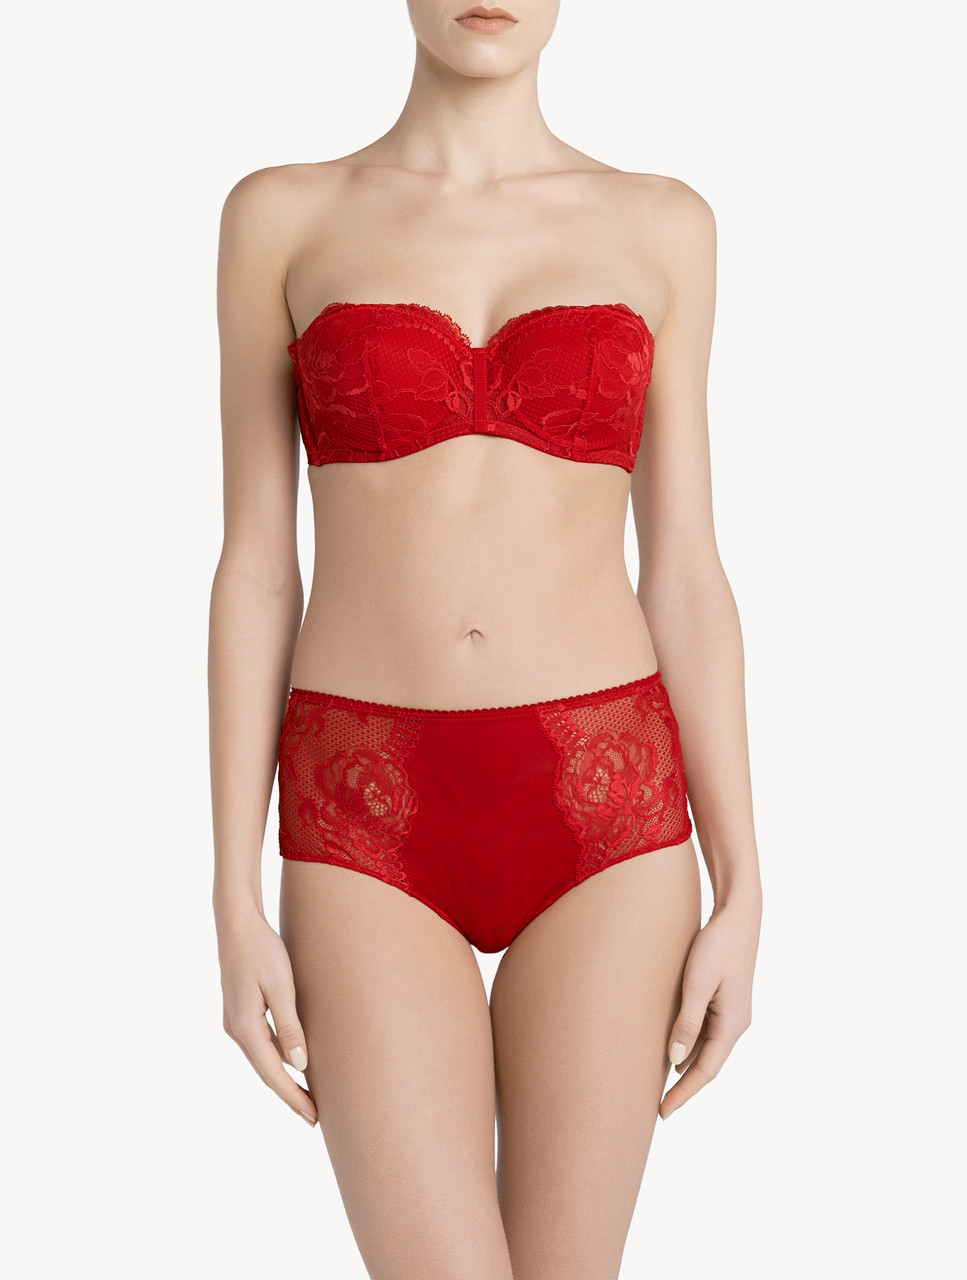 Red lace bandeau bra - ONLINE EXCLUSIVE